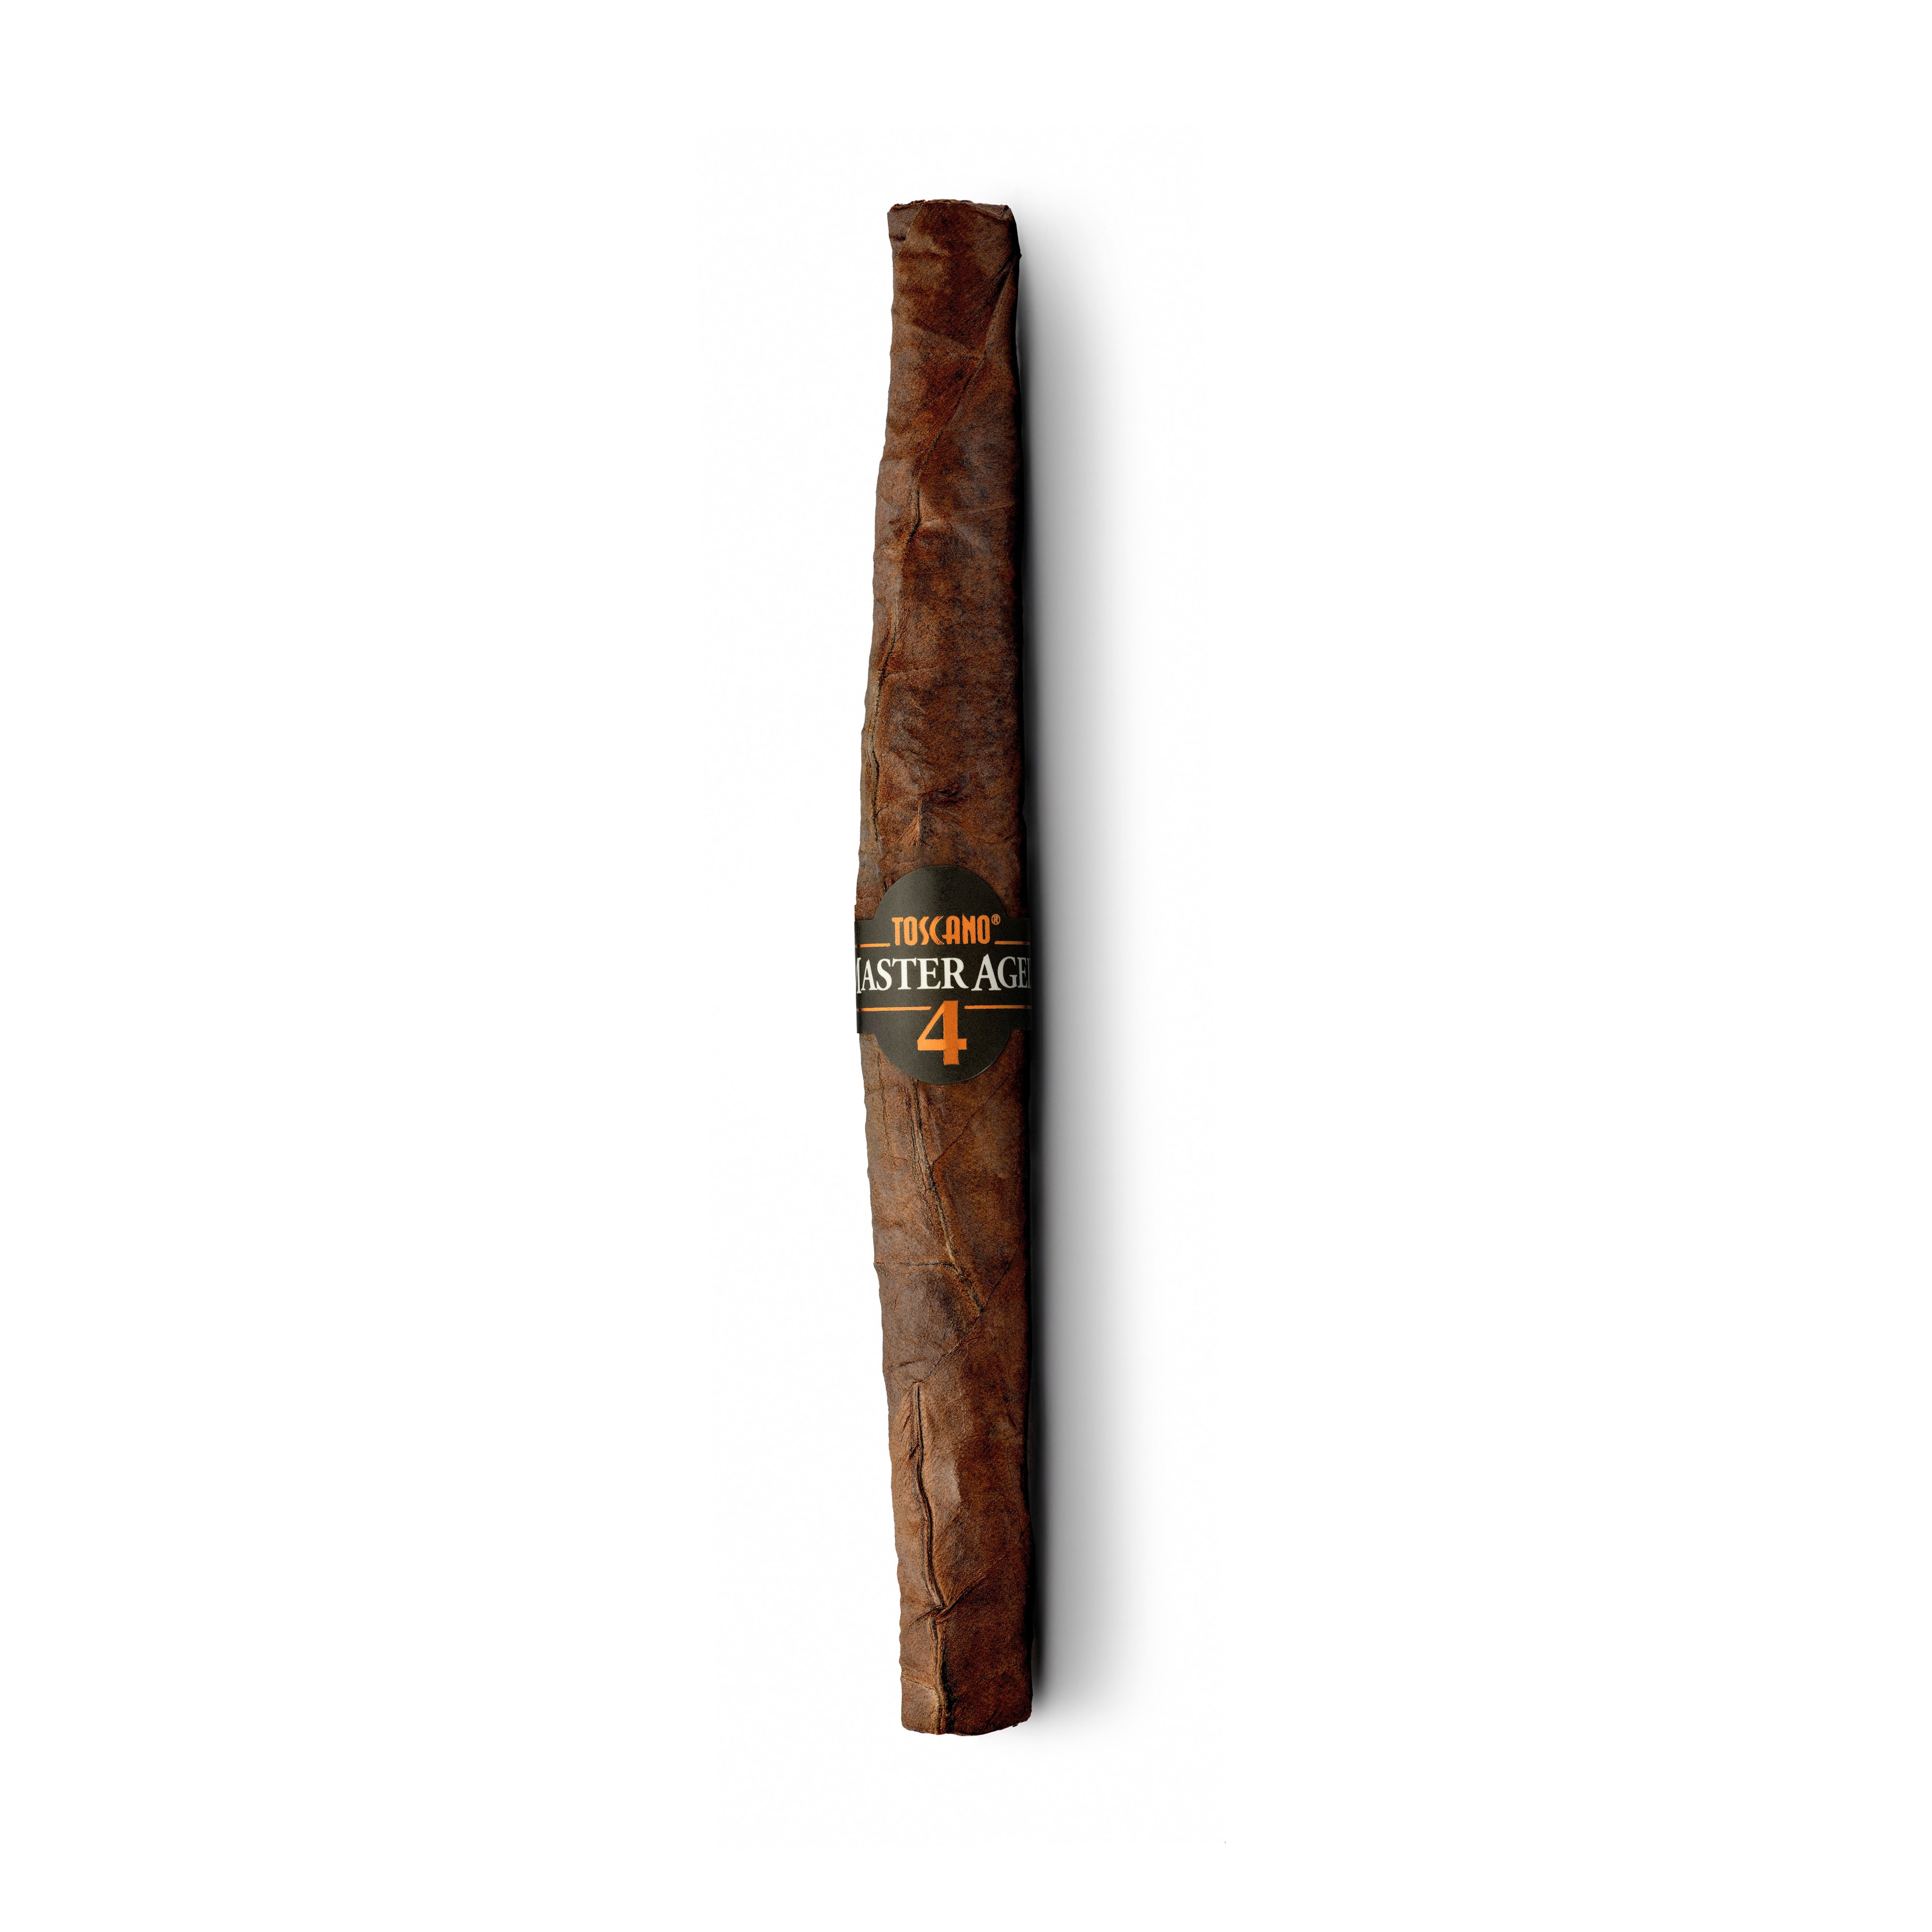 Toscano Master Aged Serie 4